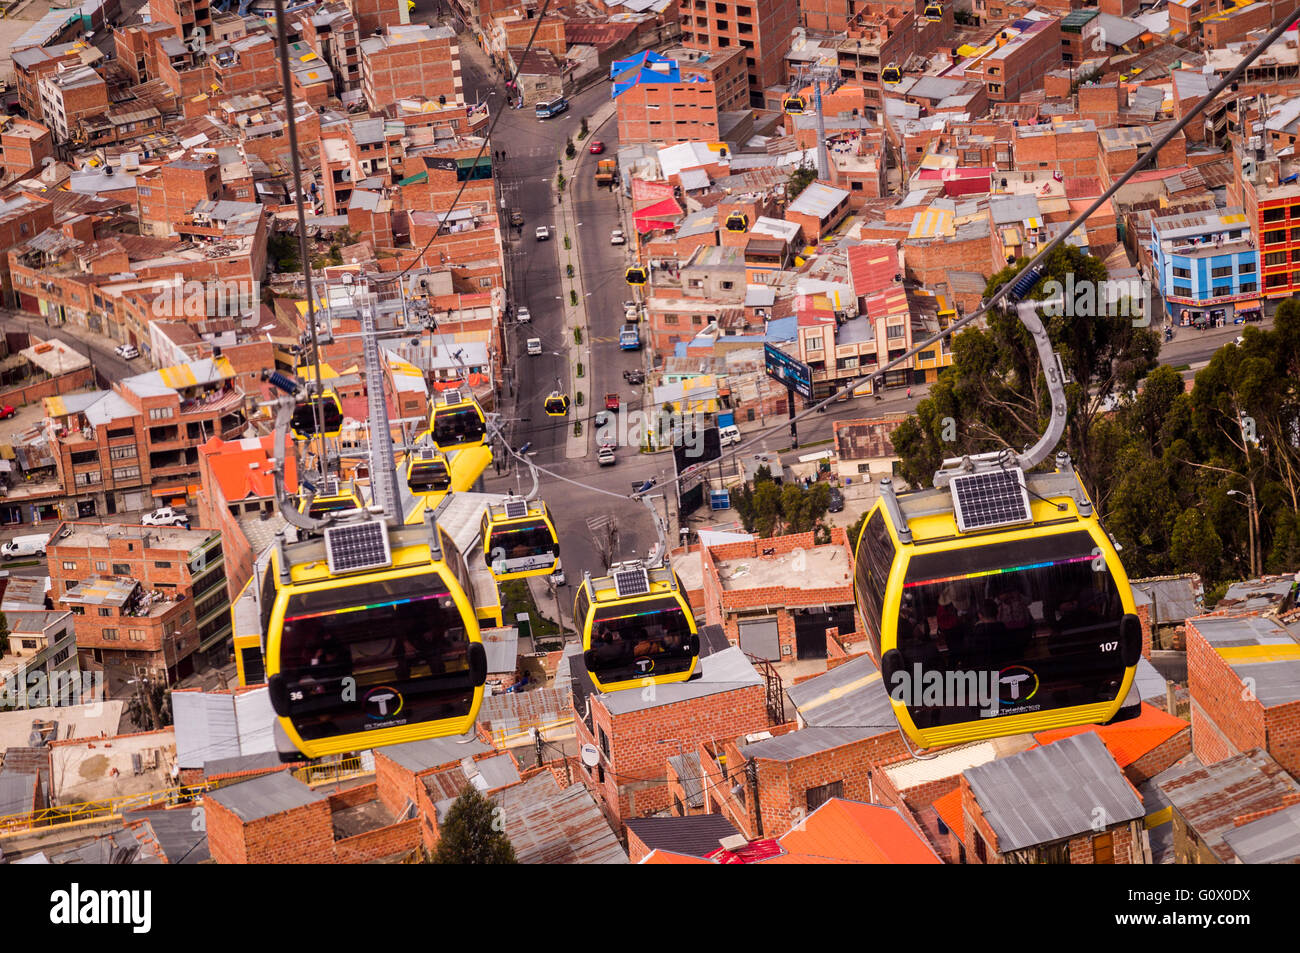 The cable cars connecting La Paz and El Alto are part of the public transport system in Bolivias biggest city - La Paz, BOLIVIA Stock Photo